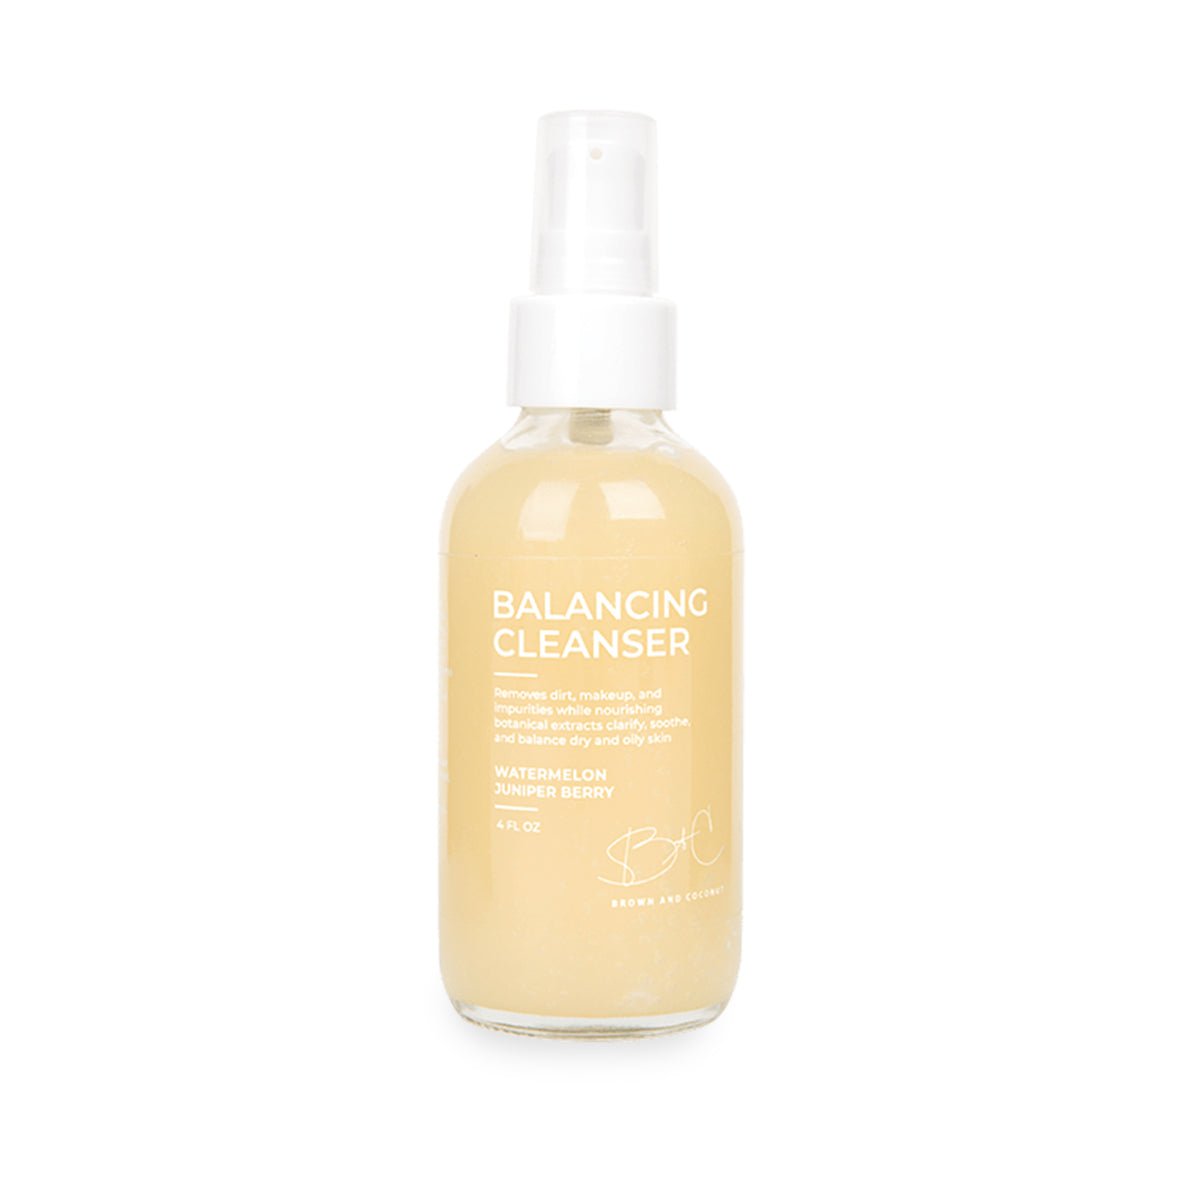 Balancing Cleanser from Brown & Coconut. Made in USA.